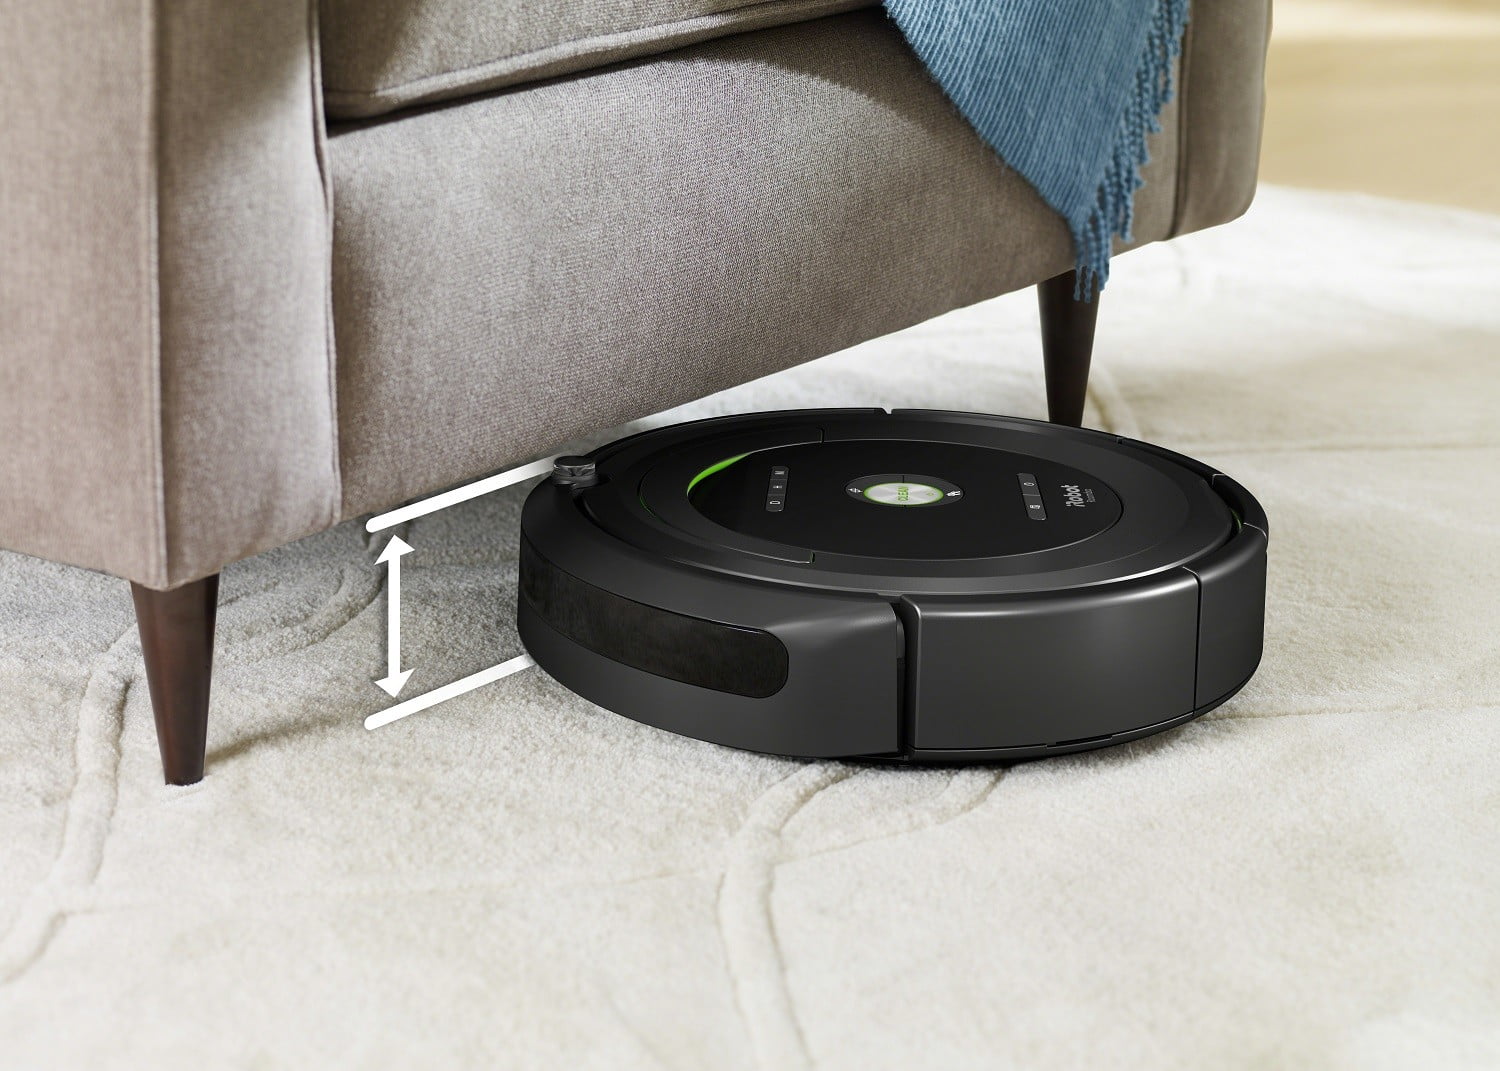 Get the best deals on Roomba in May 2021